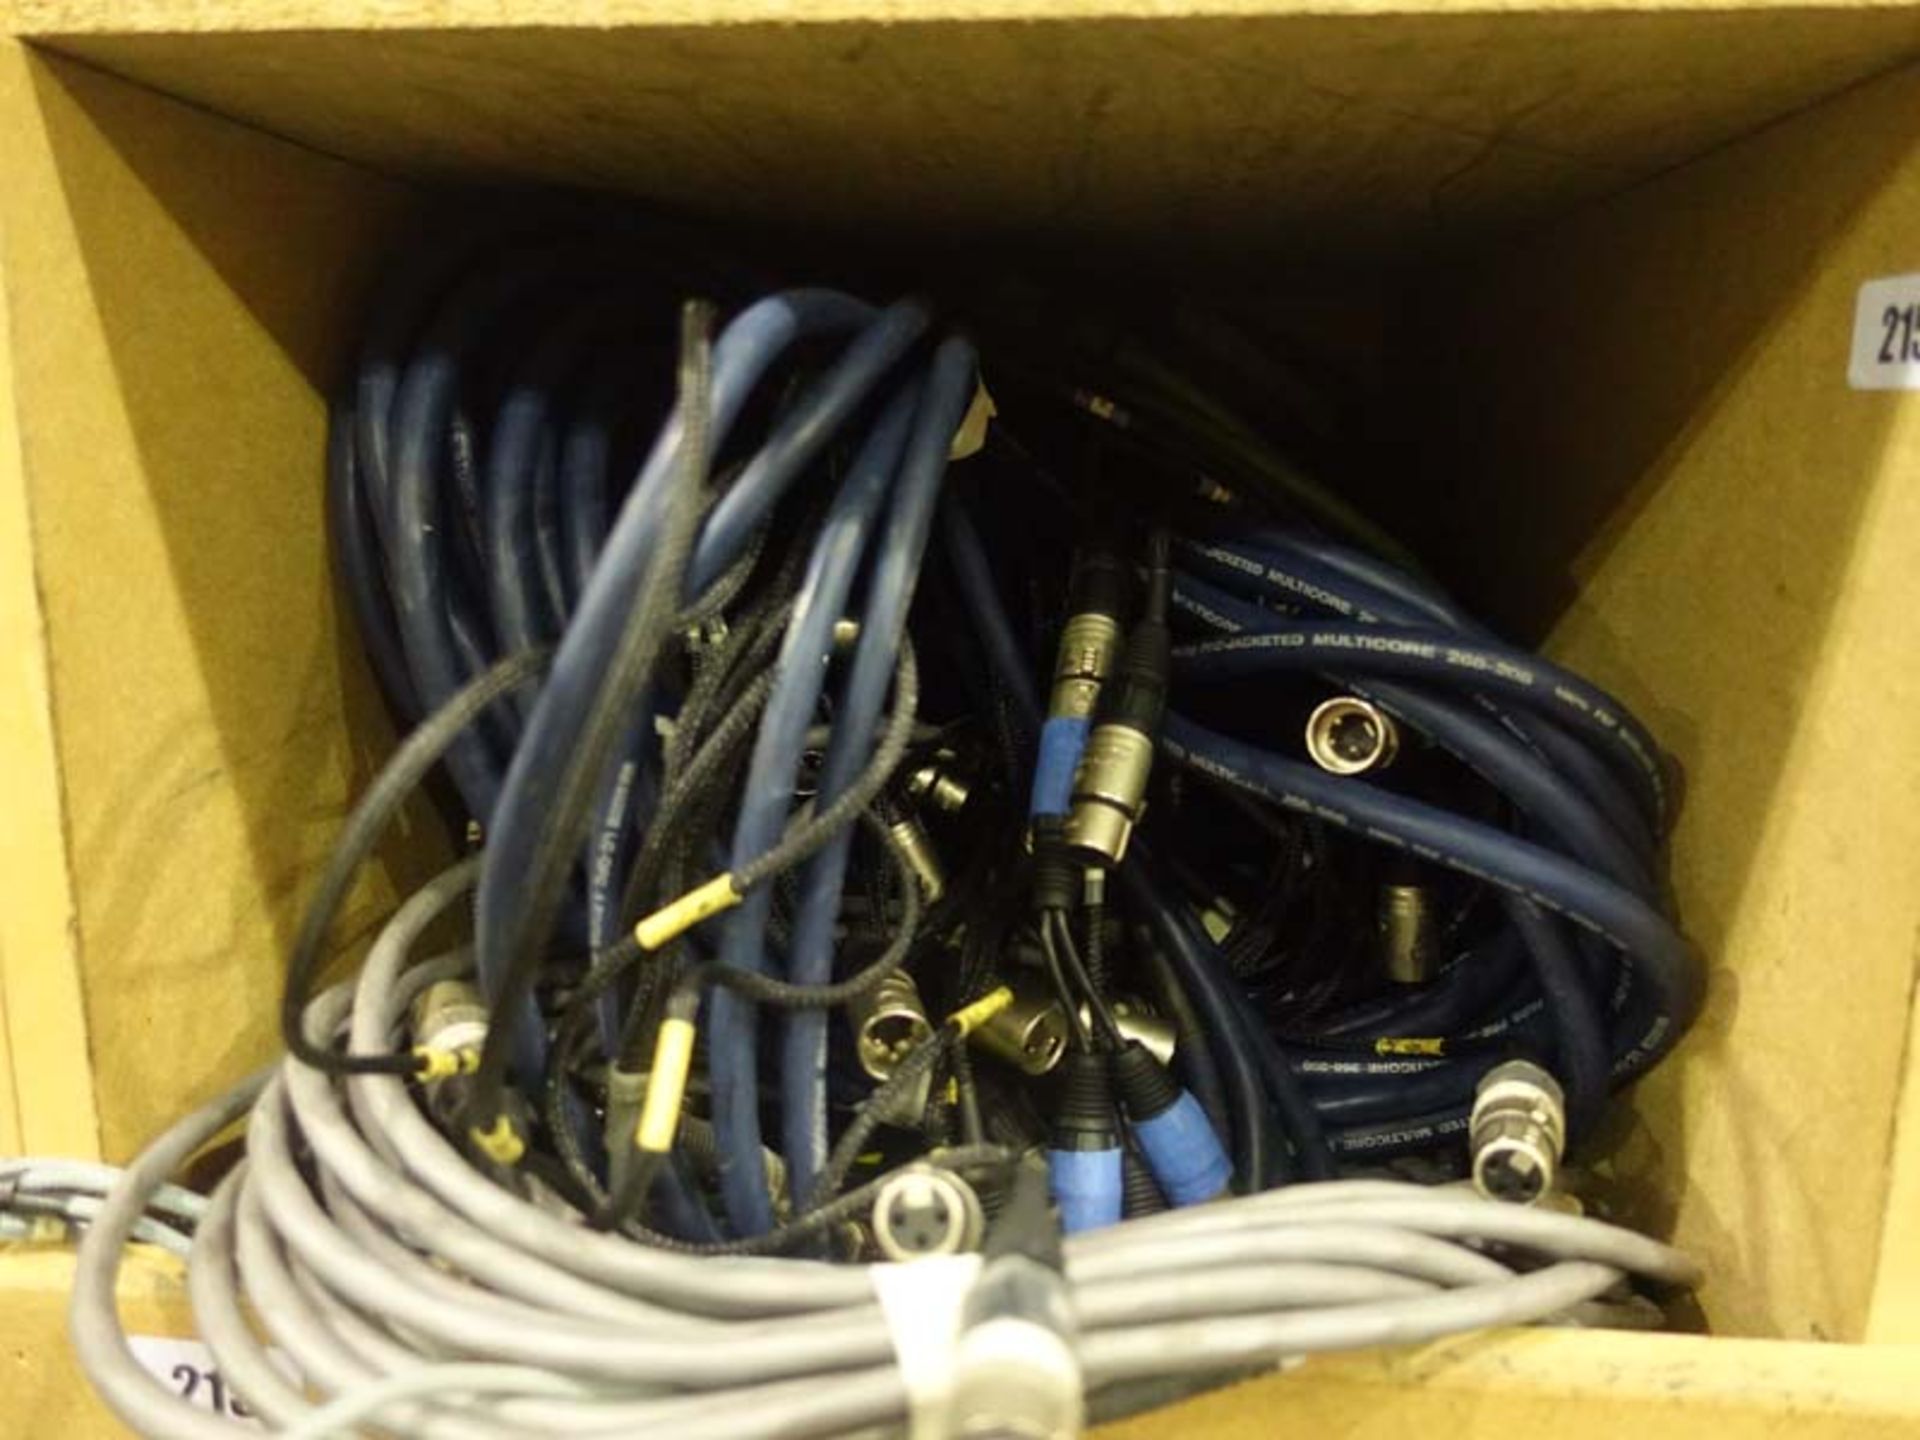 Crate containing 20 metre microphone cables